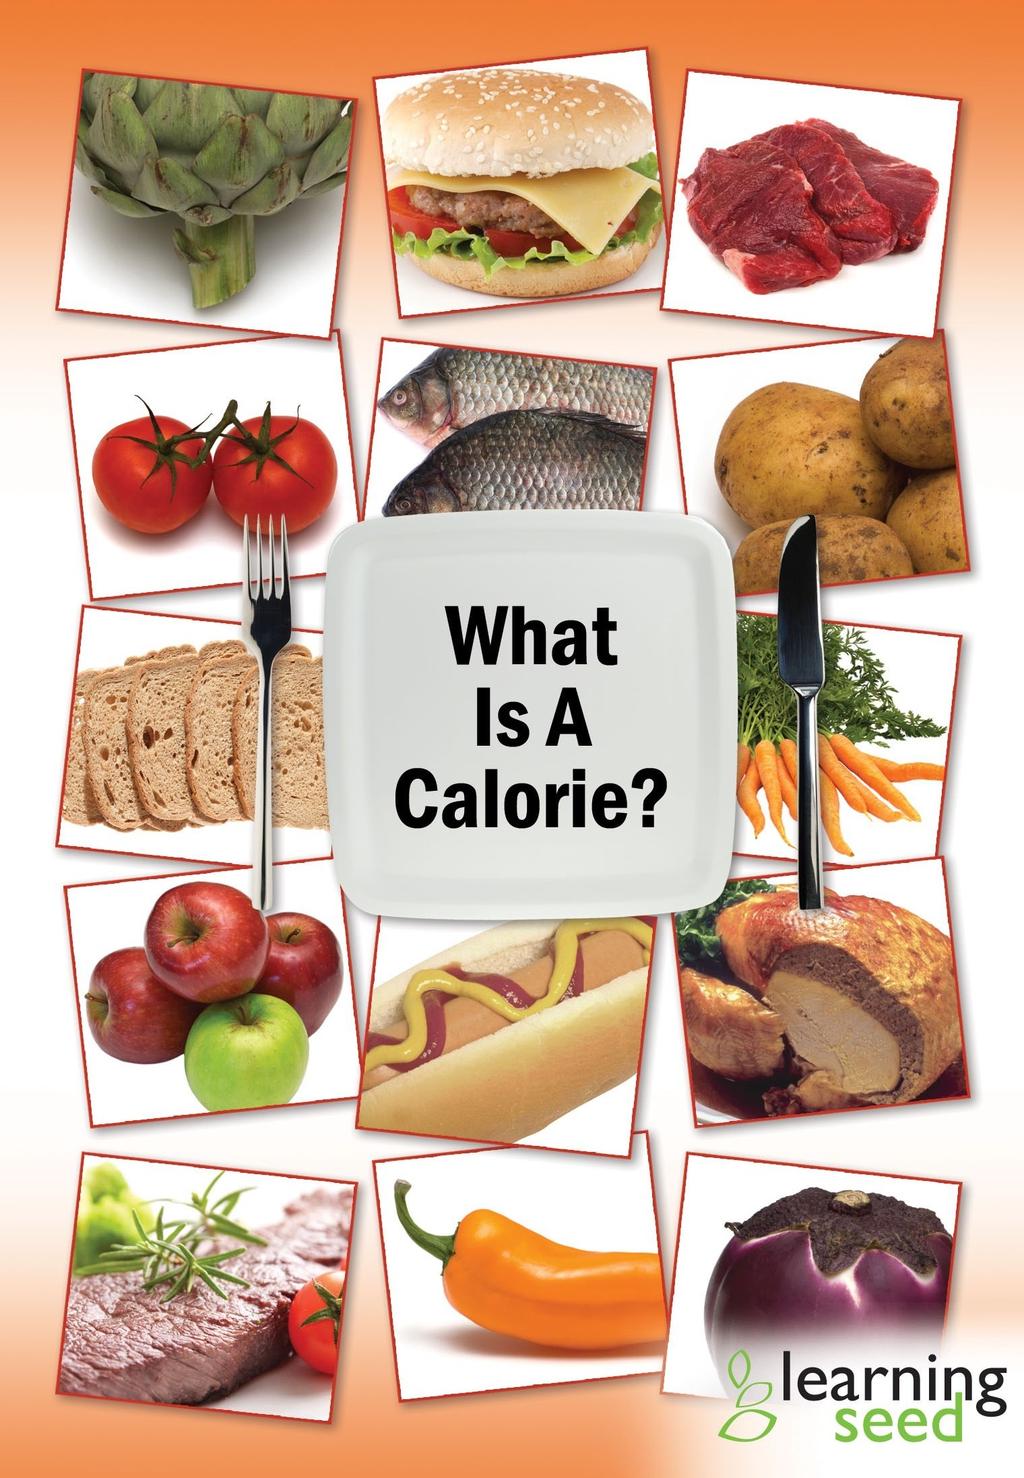 What Is A Calorie?